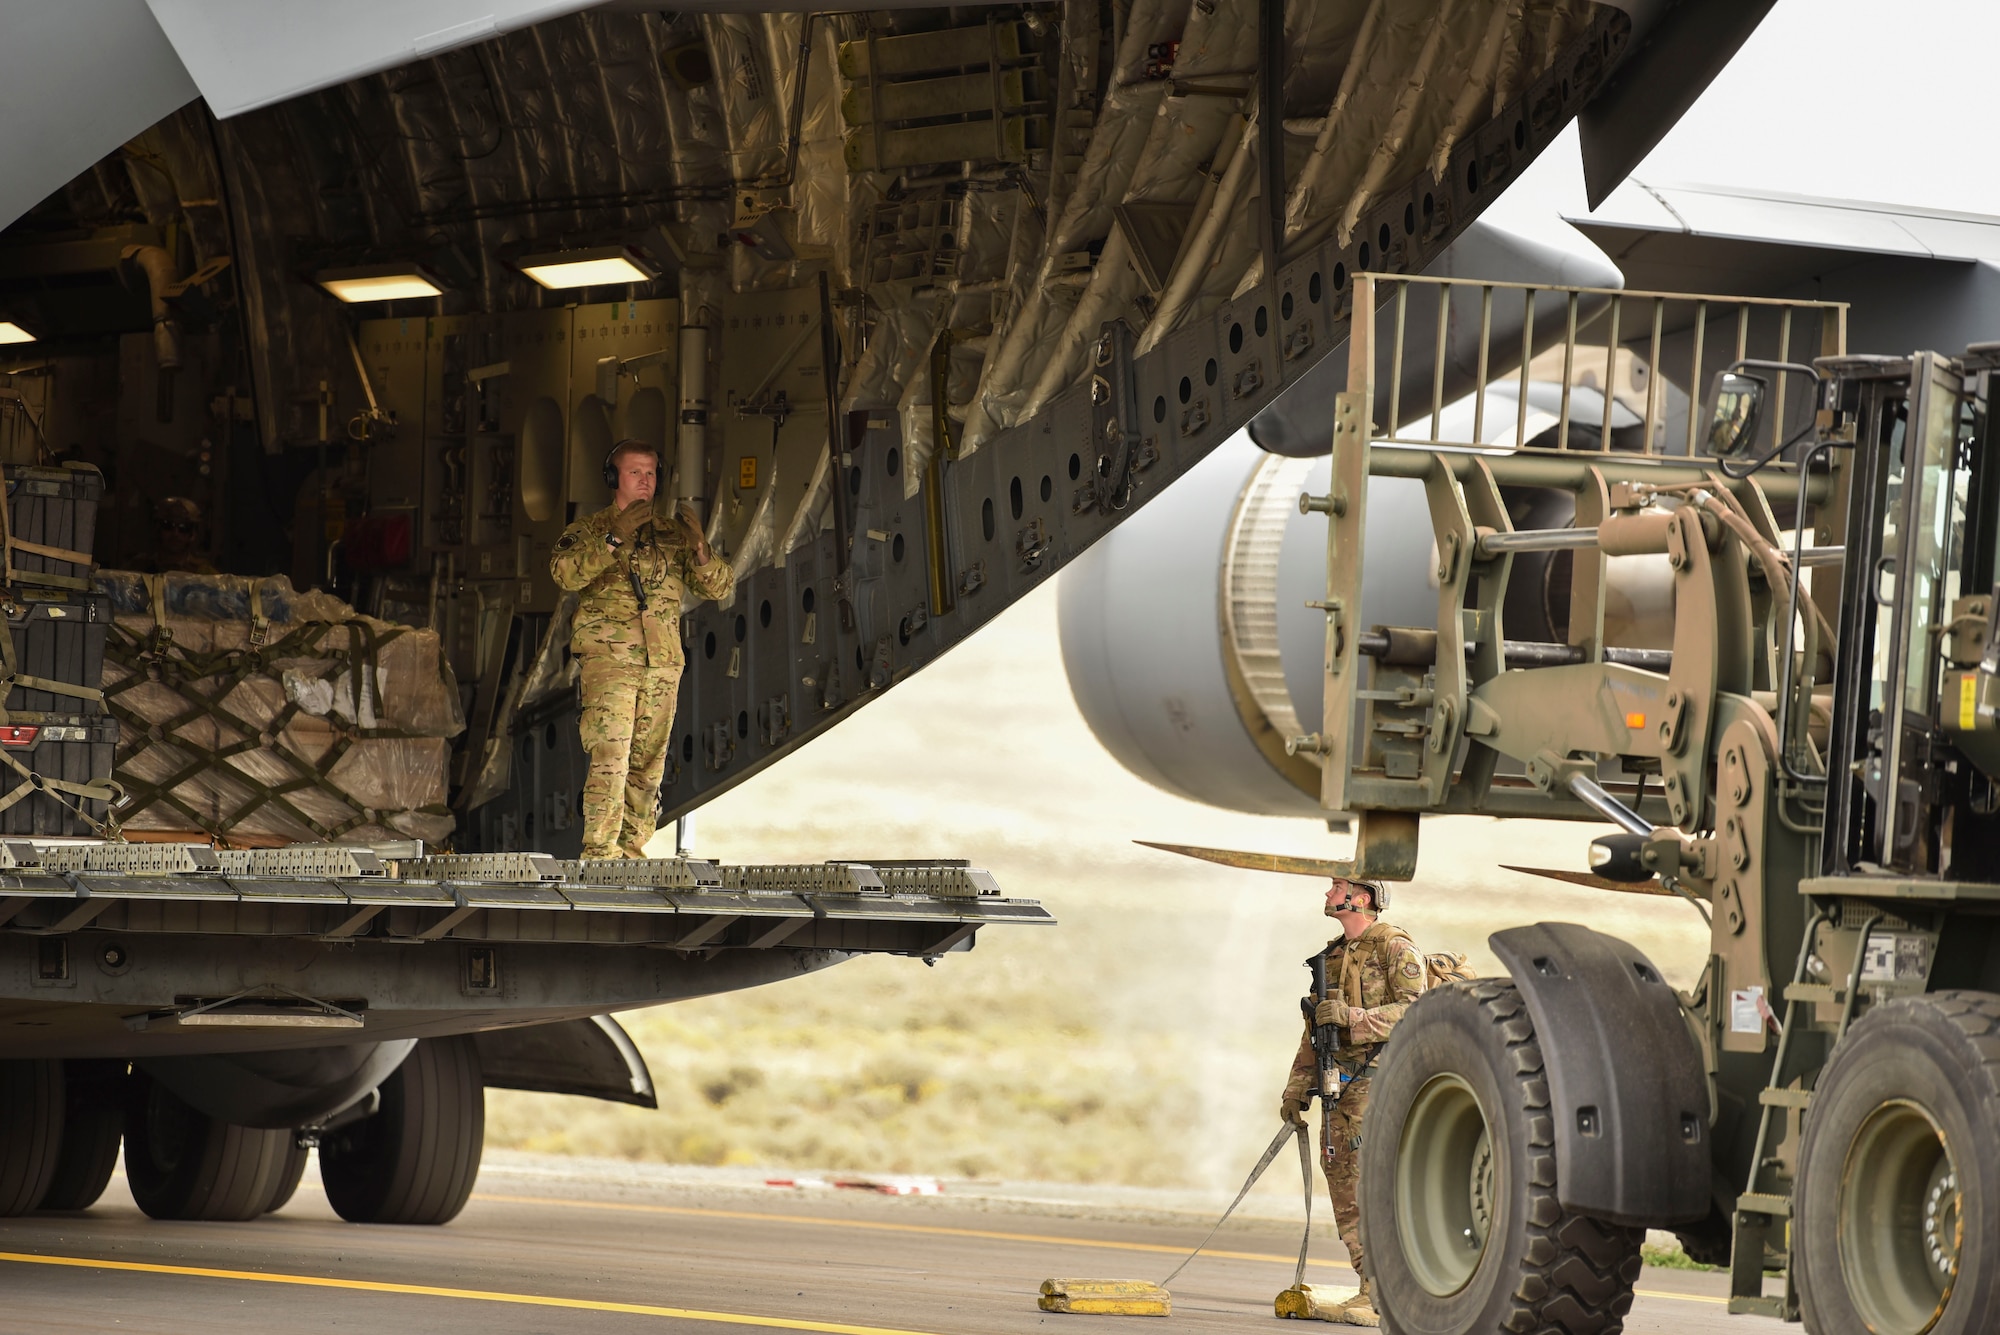 A U.S. Air Force Airman directs a forklift towards a C-17 Globemaster III to unload cargo from the C-17 as part of a Joint Forcible Entry operation during Air Mobility Command’s Mobility Guardian exercise.